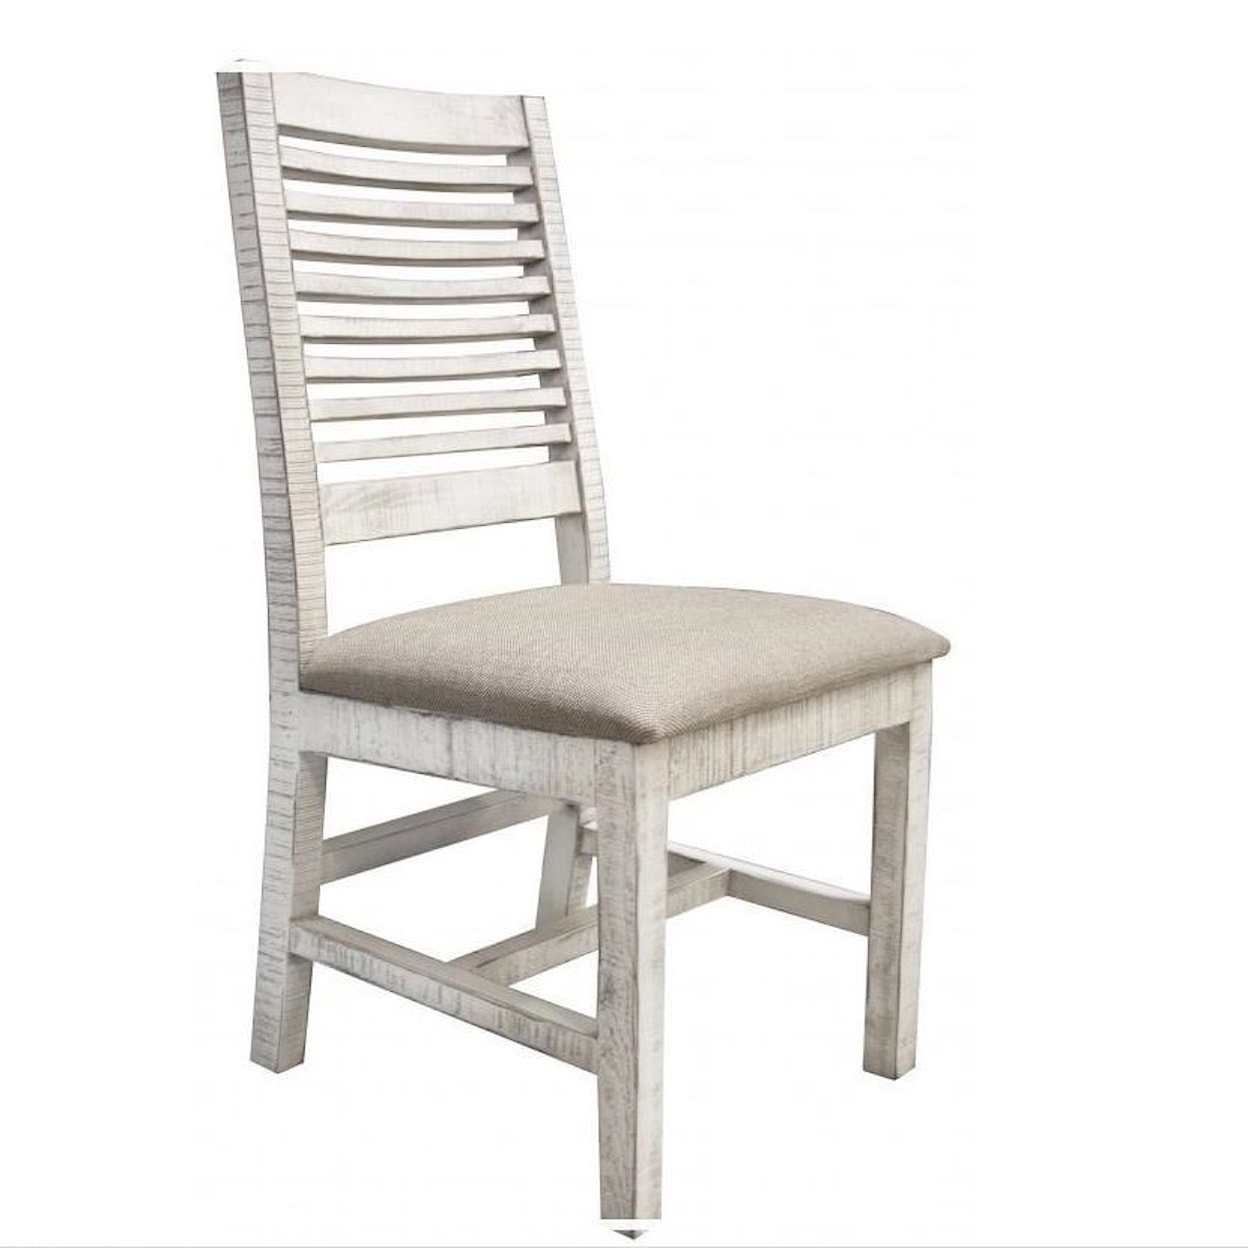 IFD International Furniture Direct Stone Dining Side Chair